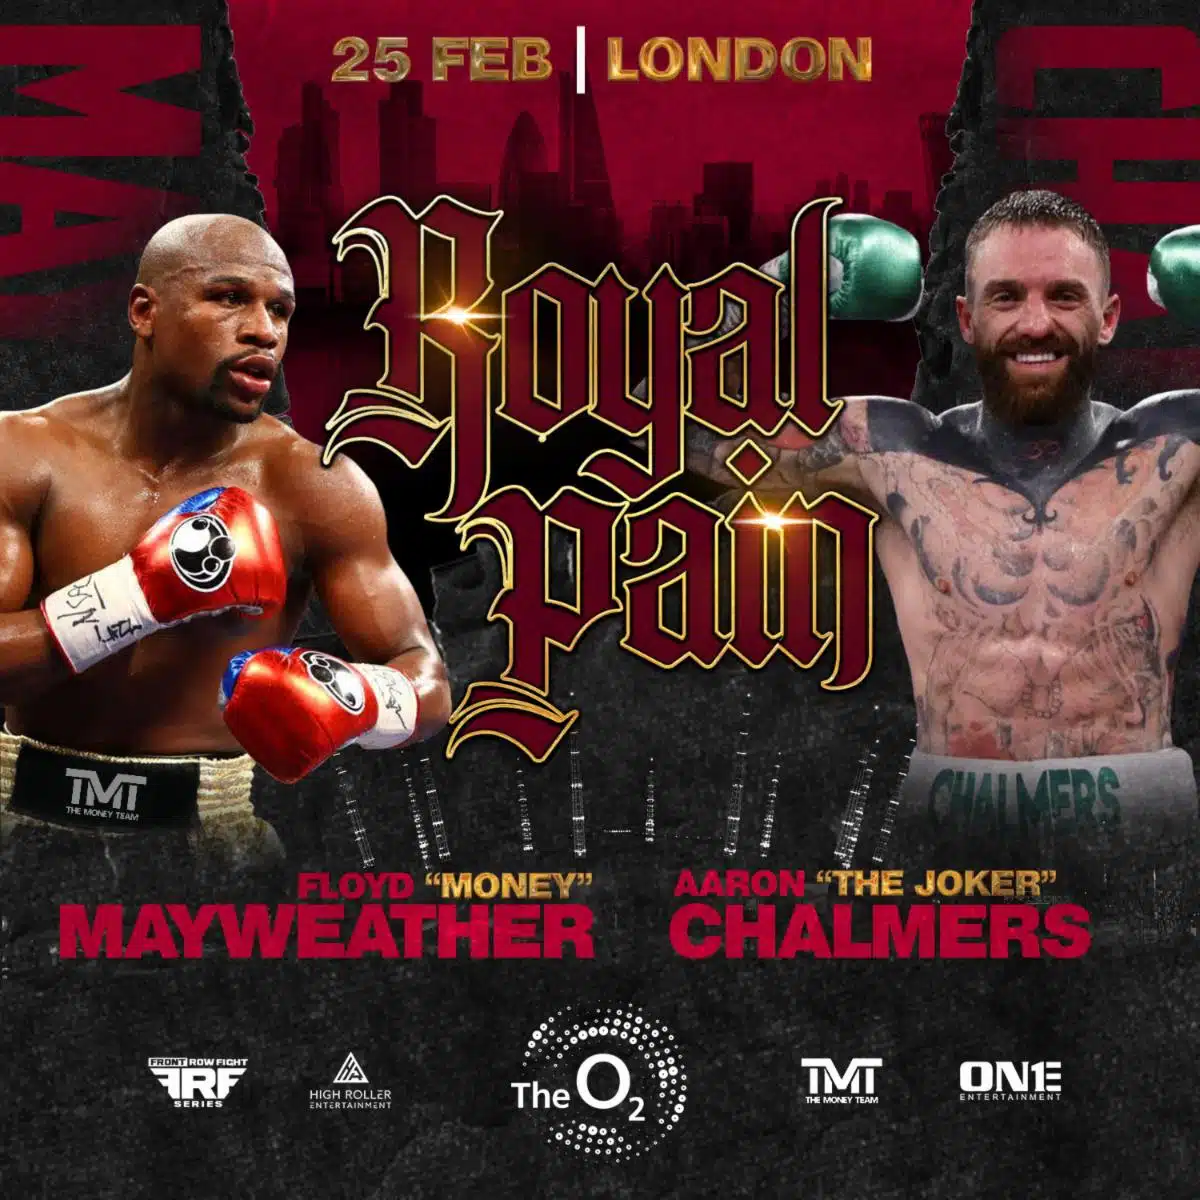 Floyd Mayweather To Make UK Debut On Feb. 25 – Against A Reality TV Star